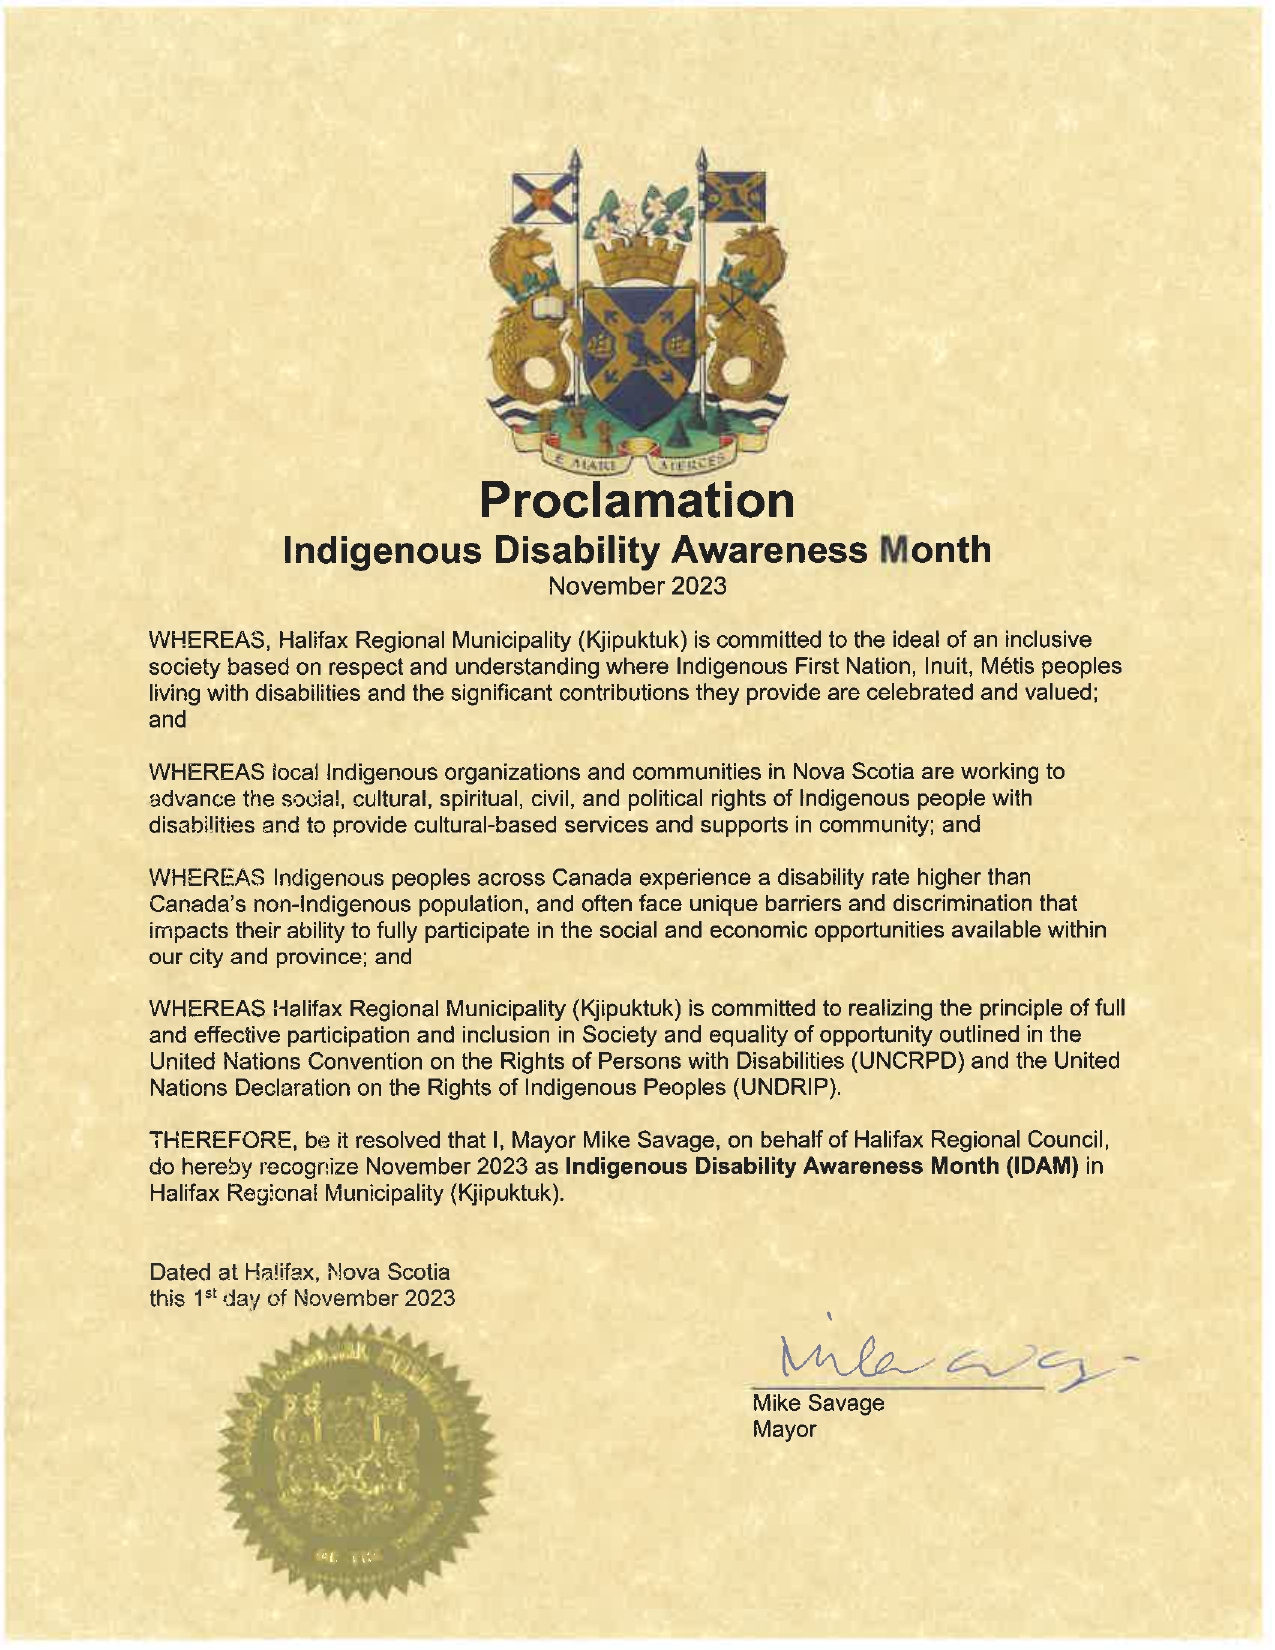 Proclamation for Indigenous Disability Awareness Month